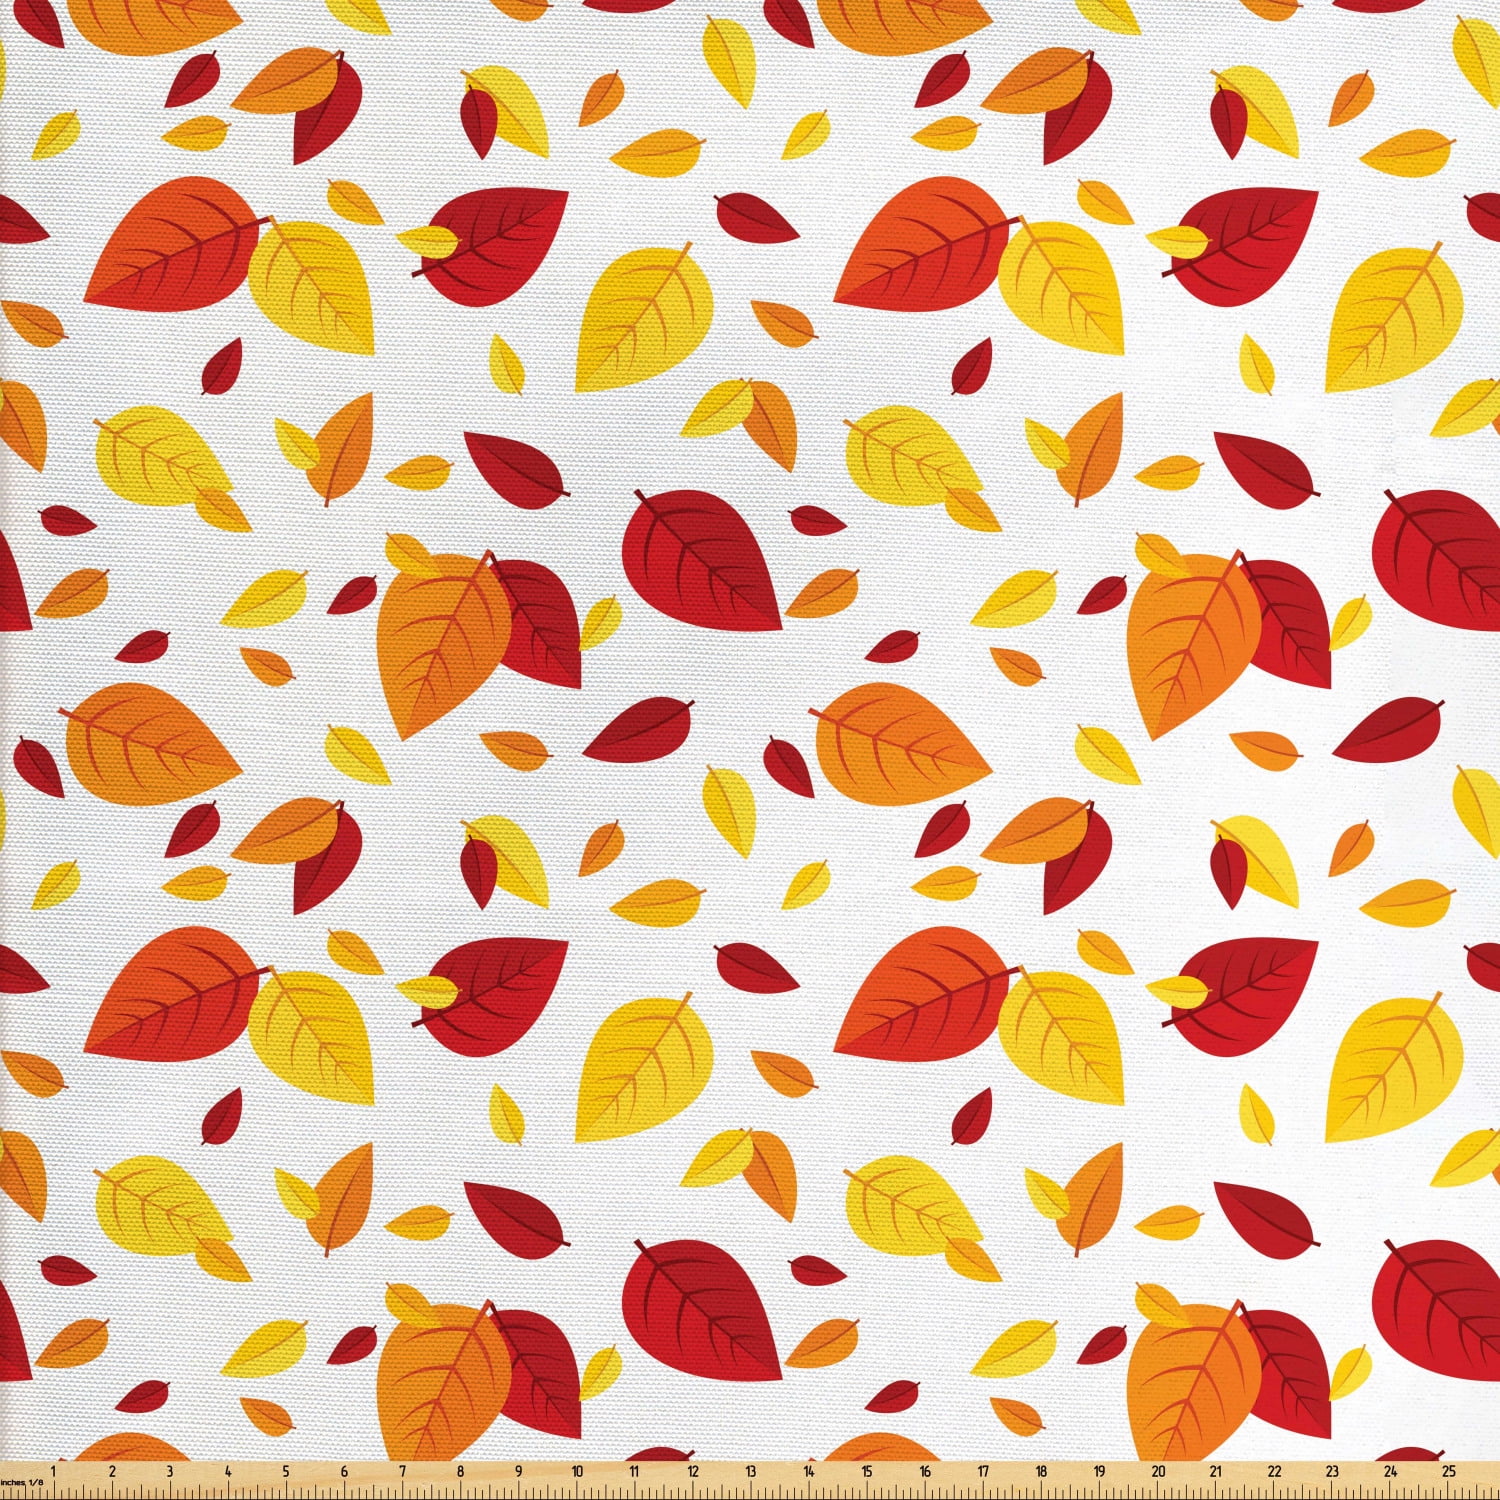 Leaf Fabric by The Yard, Colorful Fall Autumn Leaves on White